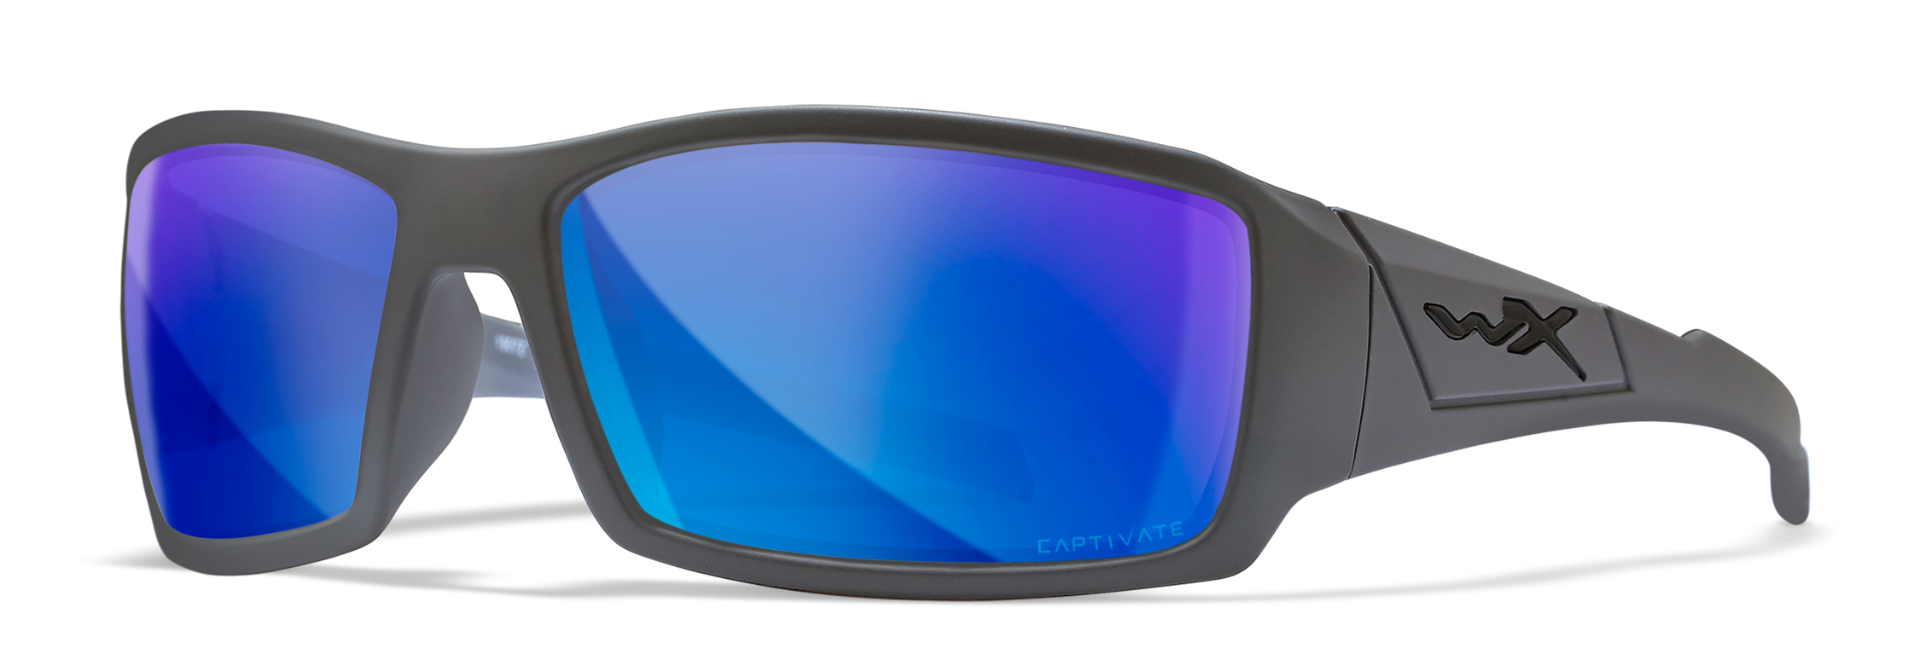 Wiley-X WX Twisted Sunglasses